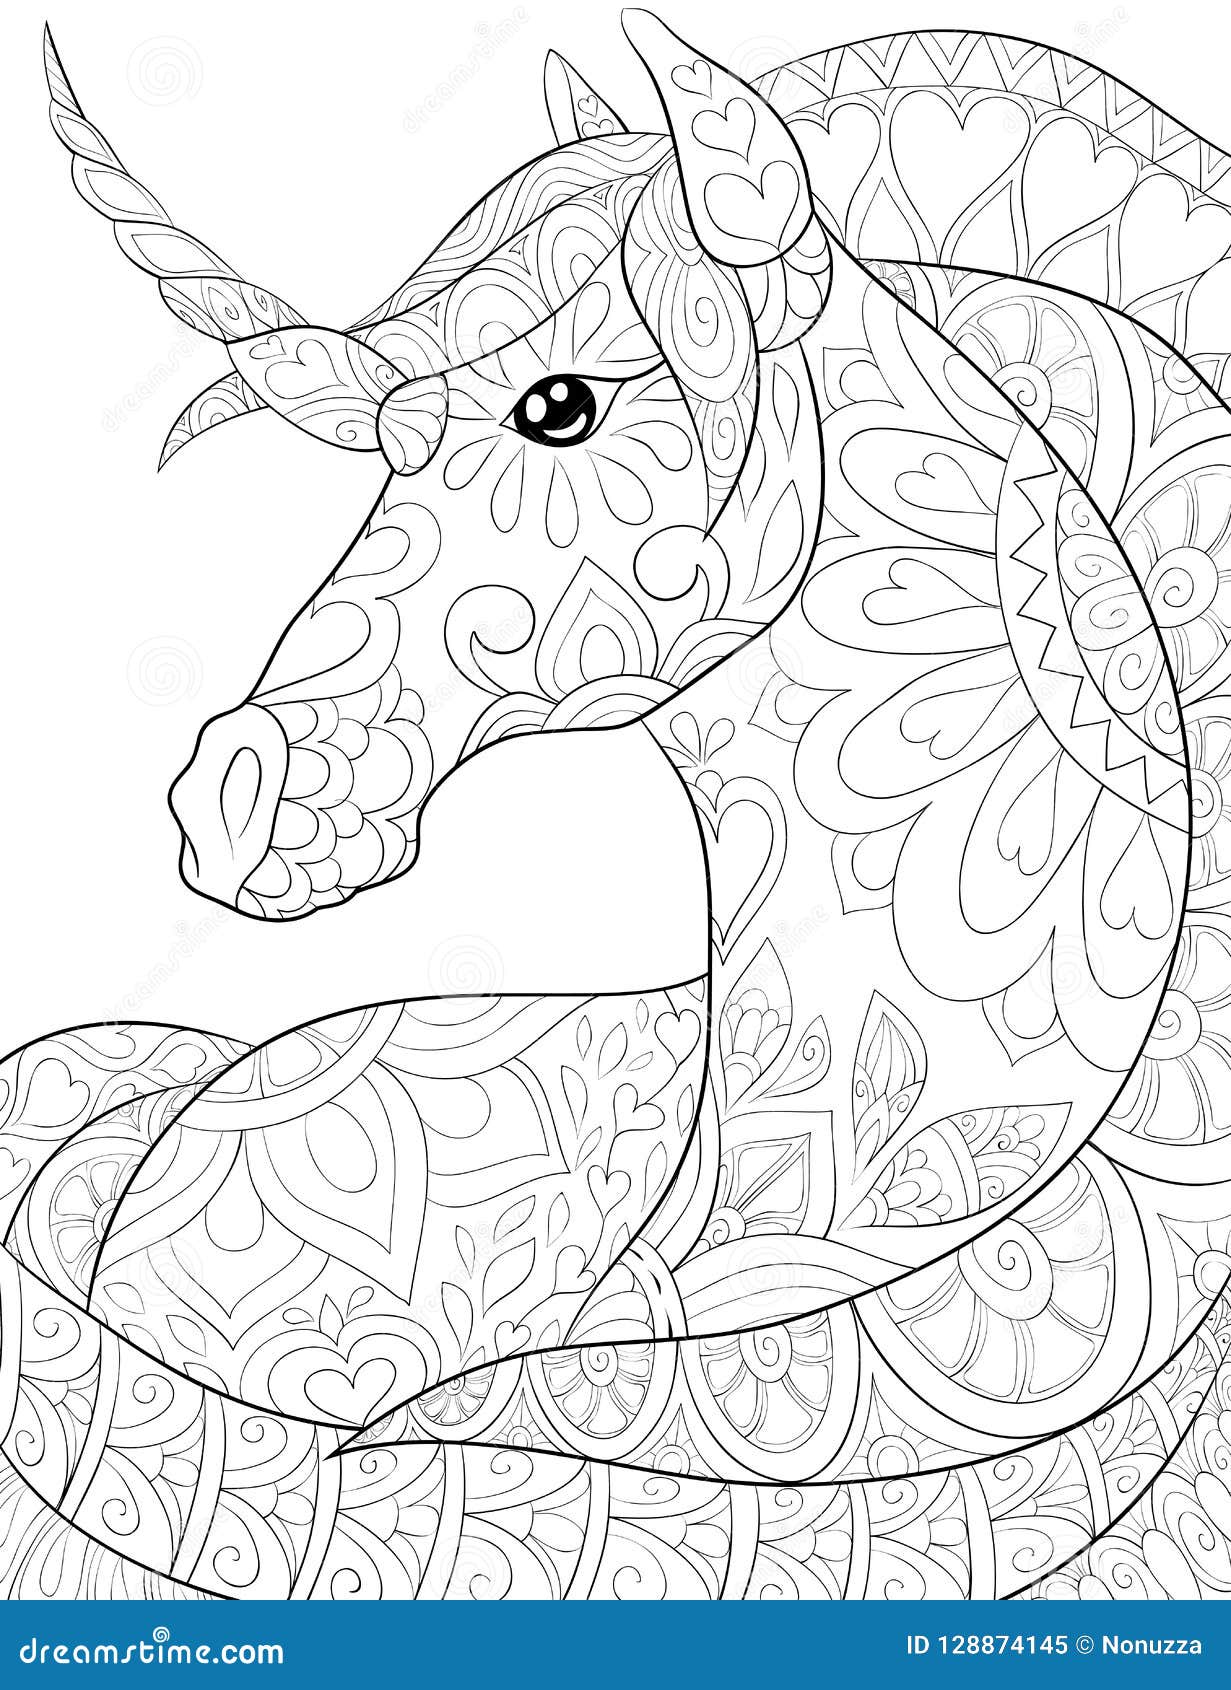 Adult coloring bookpage a cute unicorn image for relaxingzen art style illustration stock vector